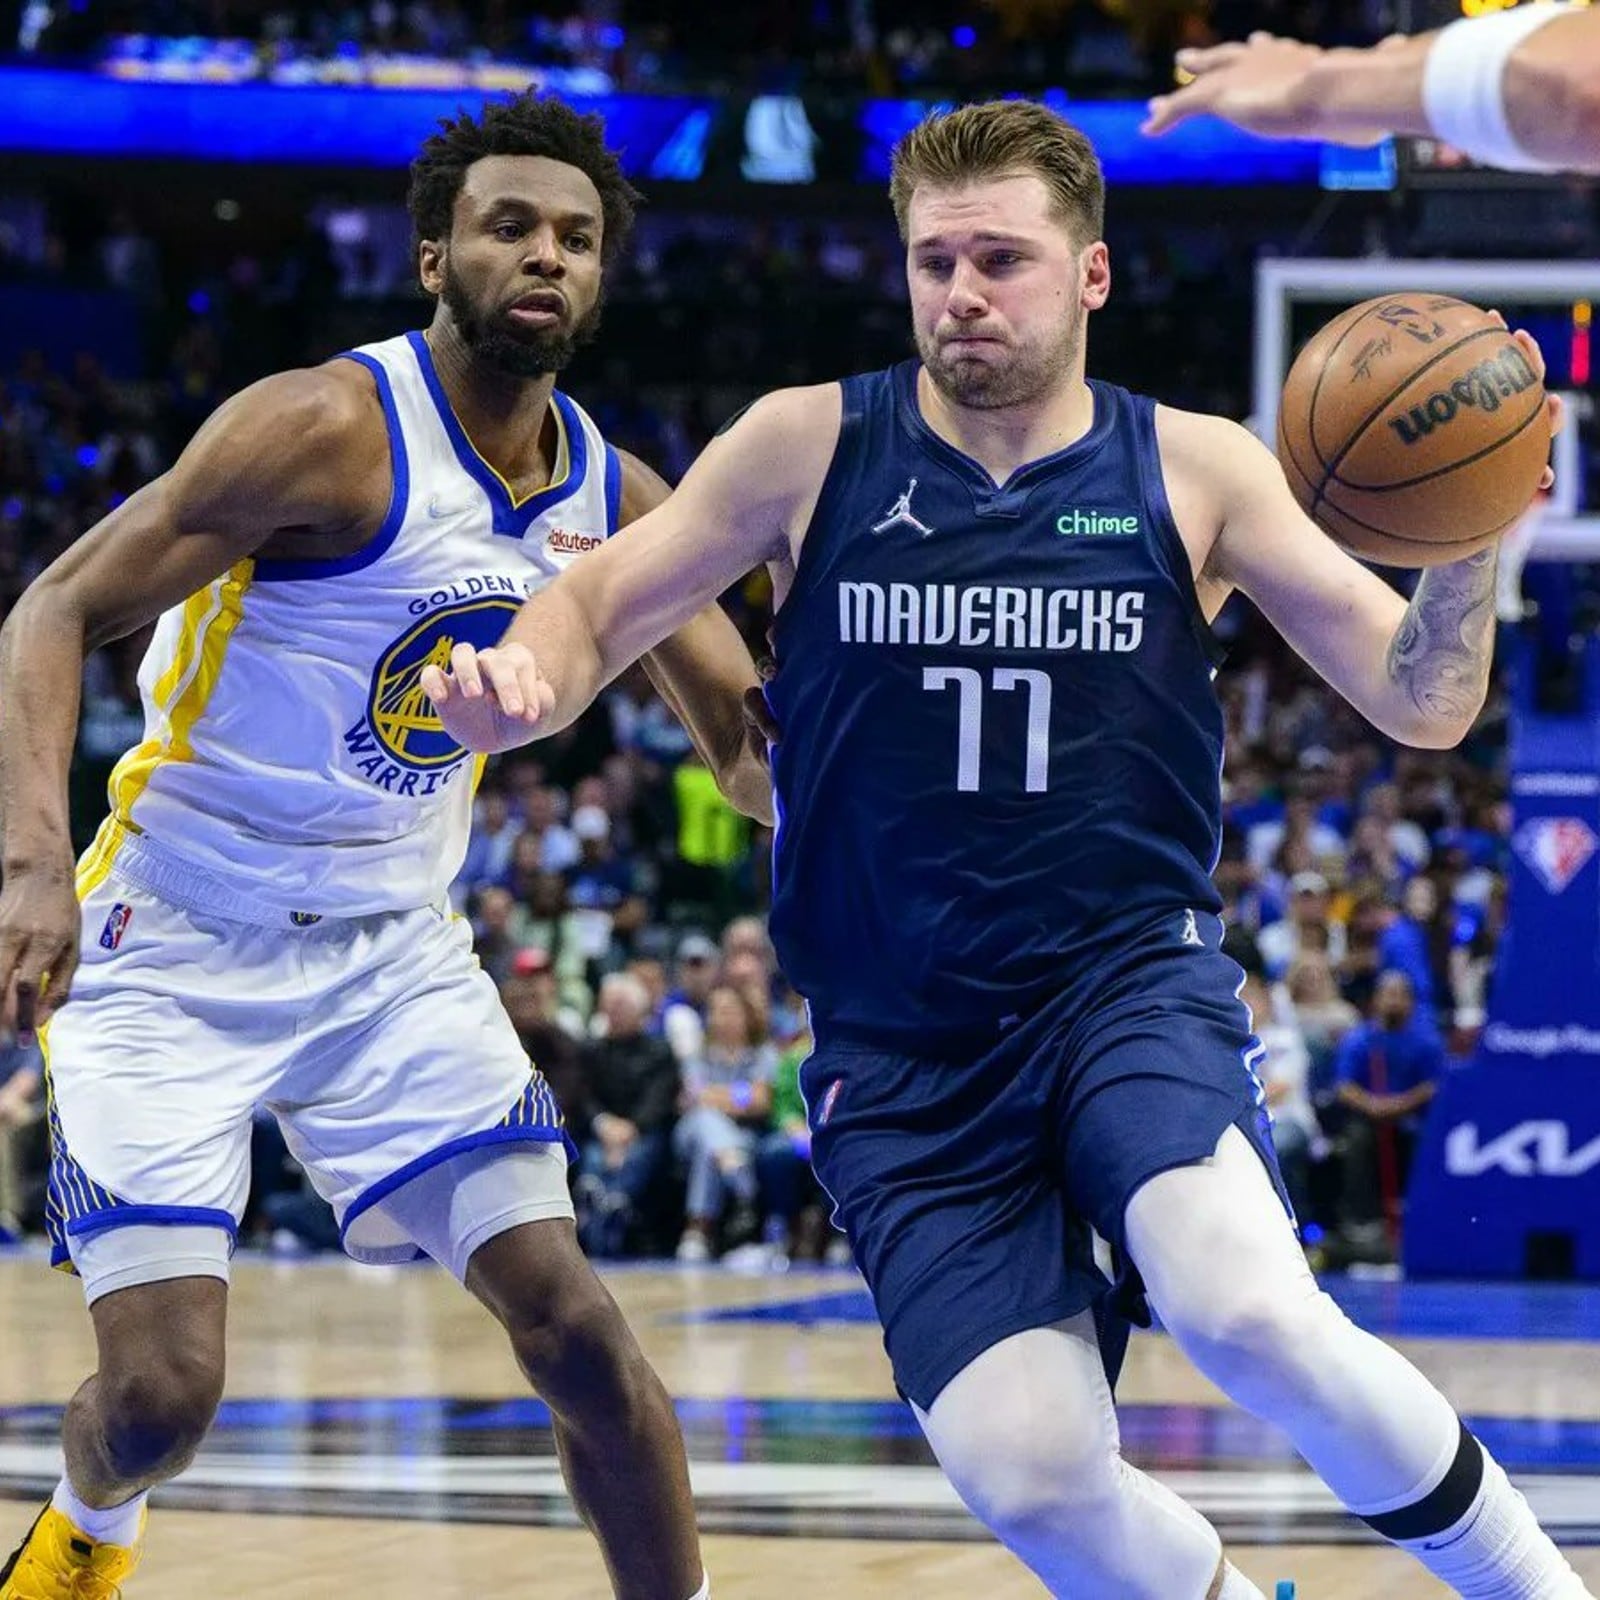 Dallas Mavericks vs Golden State Warriors Live Streaming When and Where to Watch NBA 2022 Conference Finals Live Coverage on TV Online